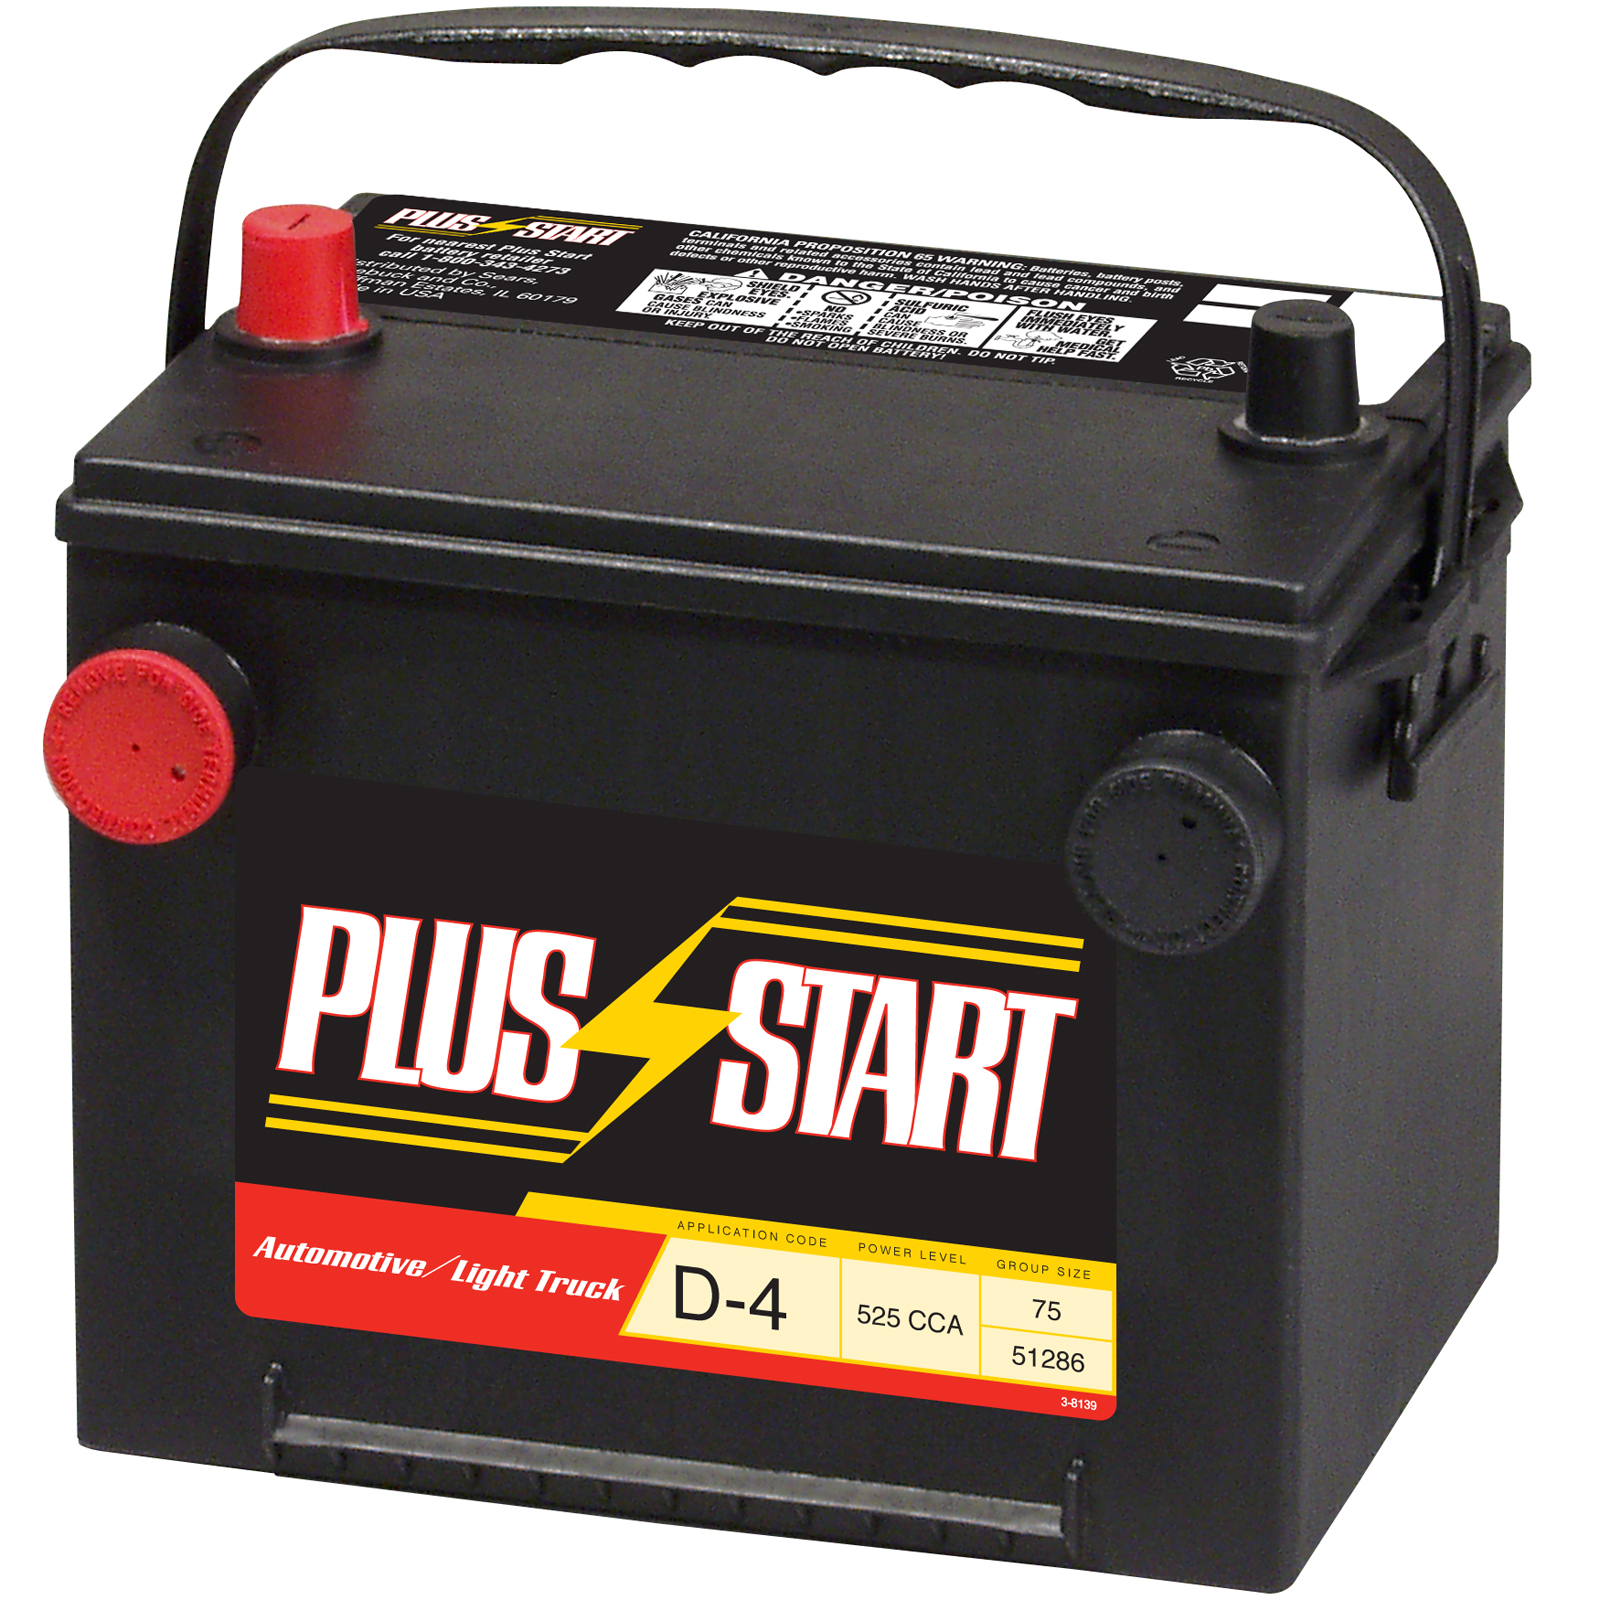 Plus Start Automotive Battery - Group Size EP-75/86 (Price with Exchange)